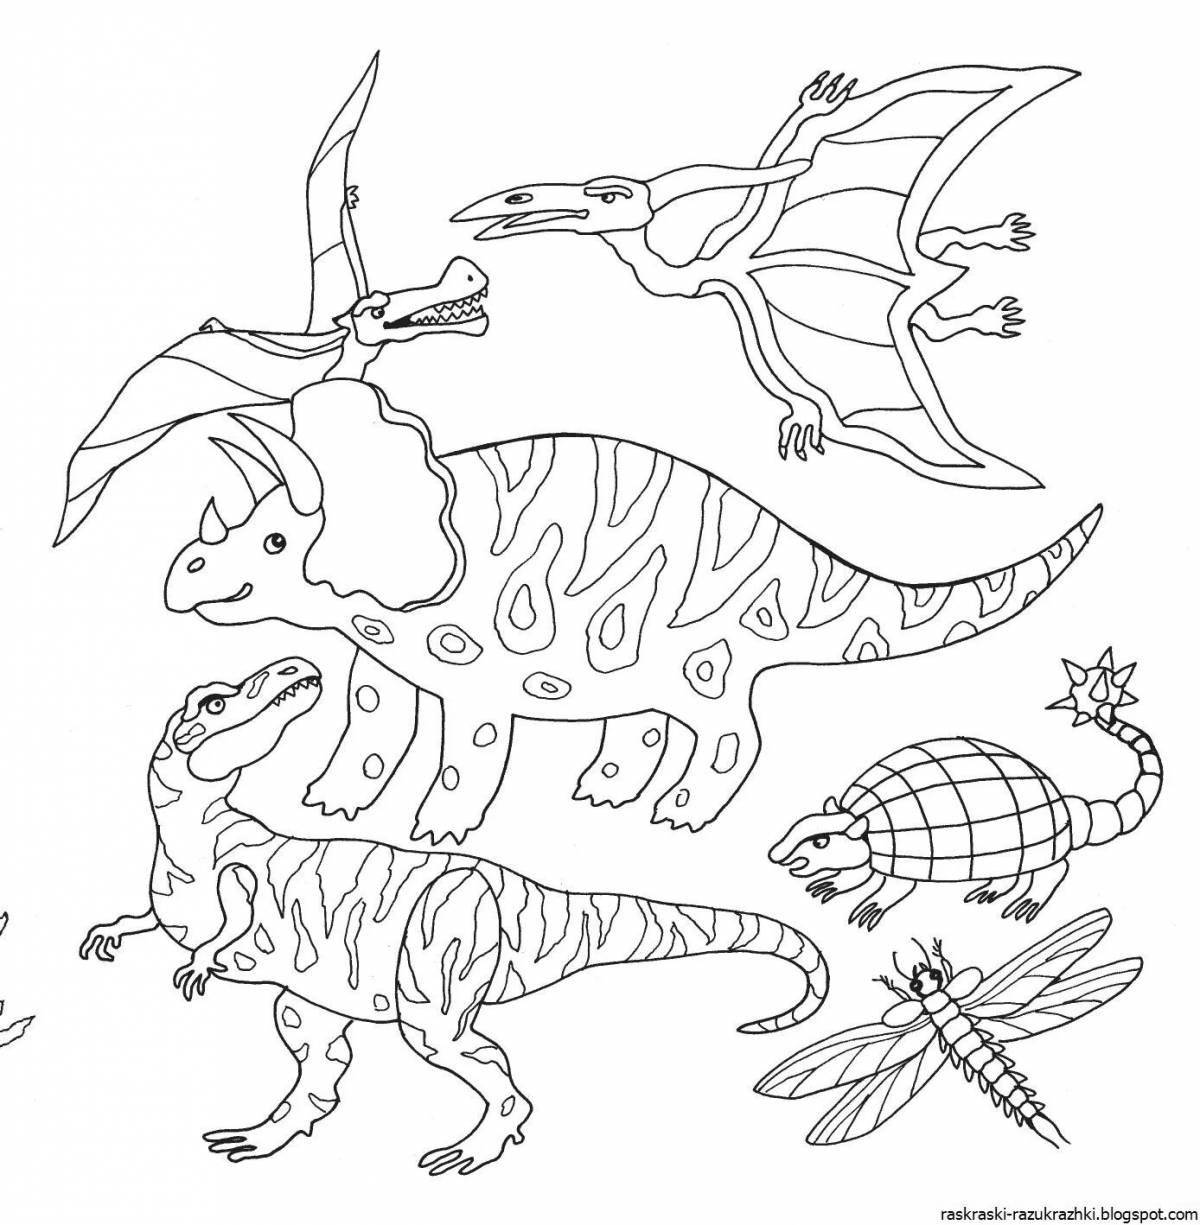 Wonderful dinosaurs coloring for boys 6-7 years old